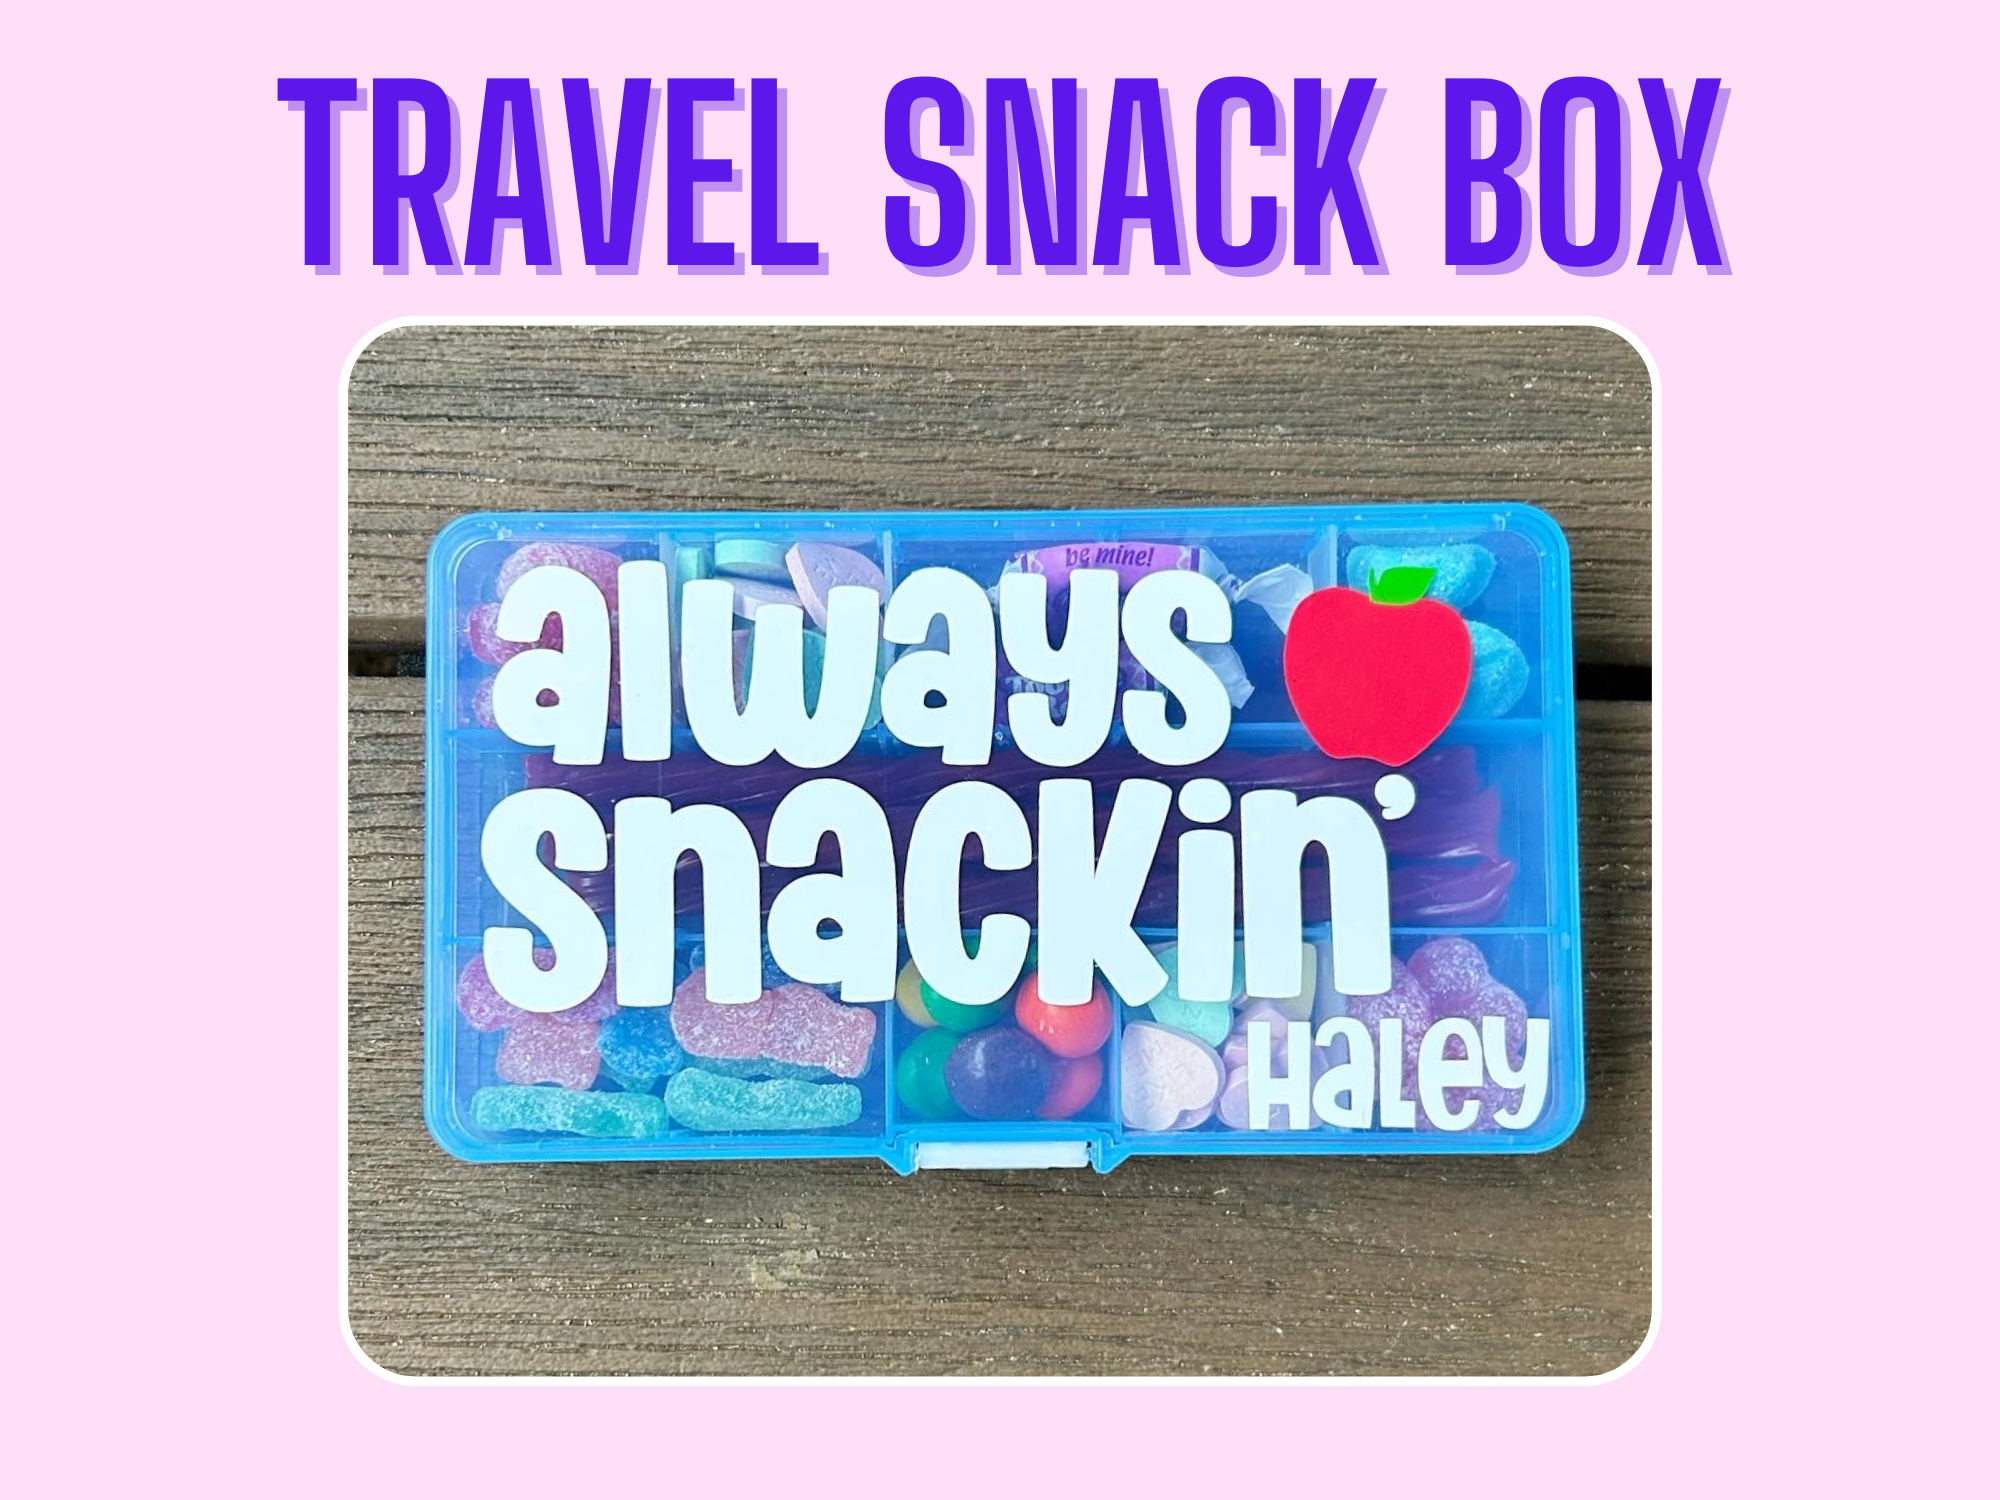 Snack Box Travel- Online Shopping for Snack Box Travel - Retail Snack Box  Travel from LightInTheBox